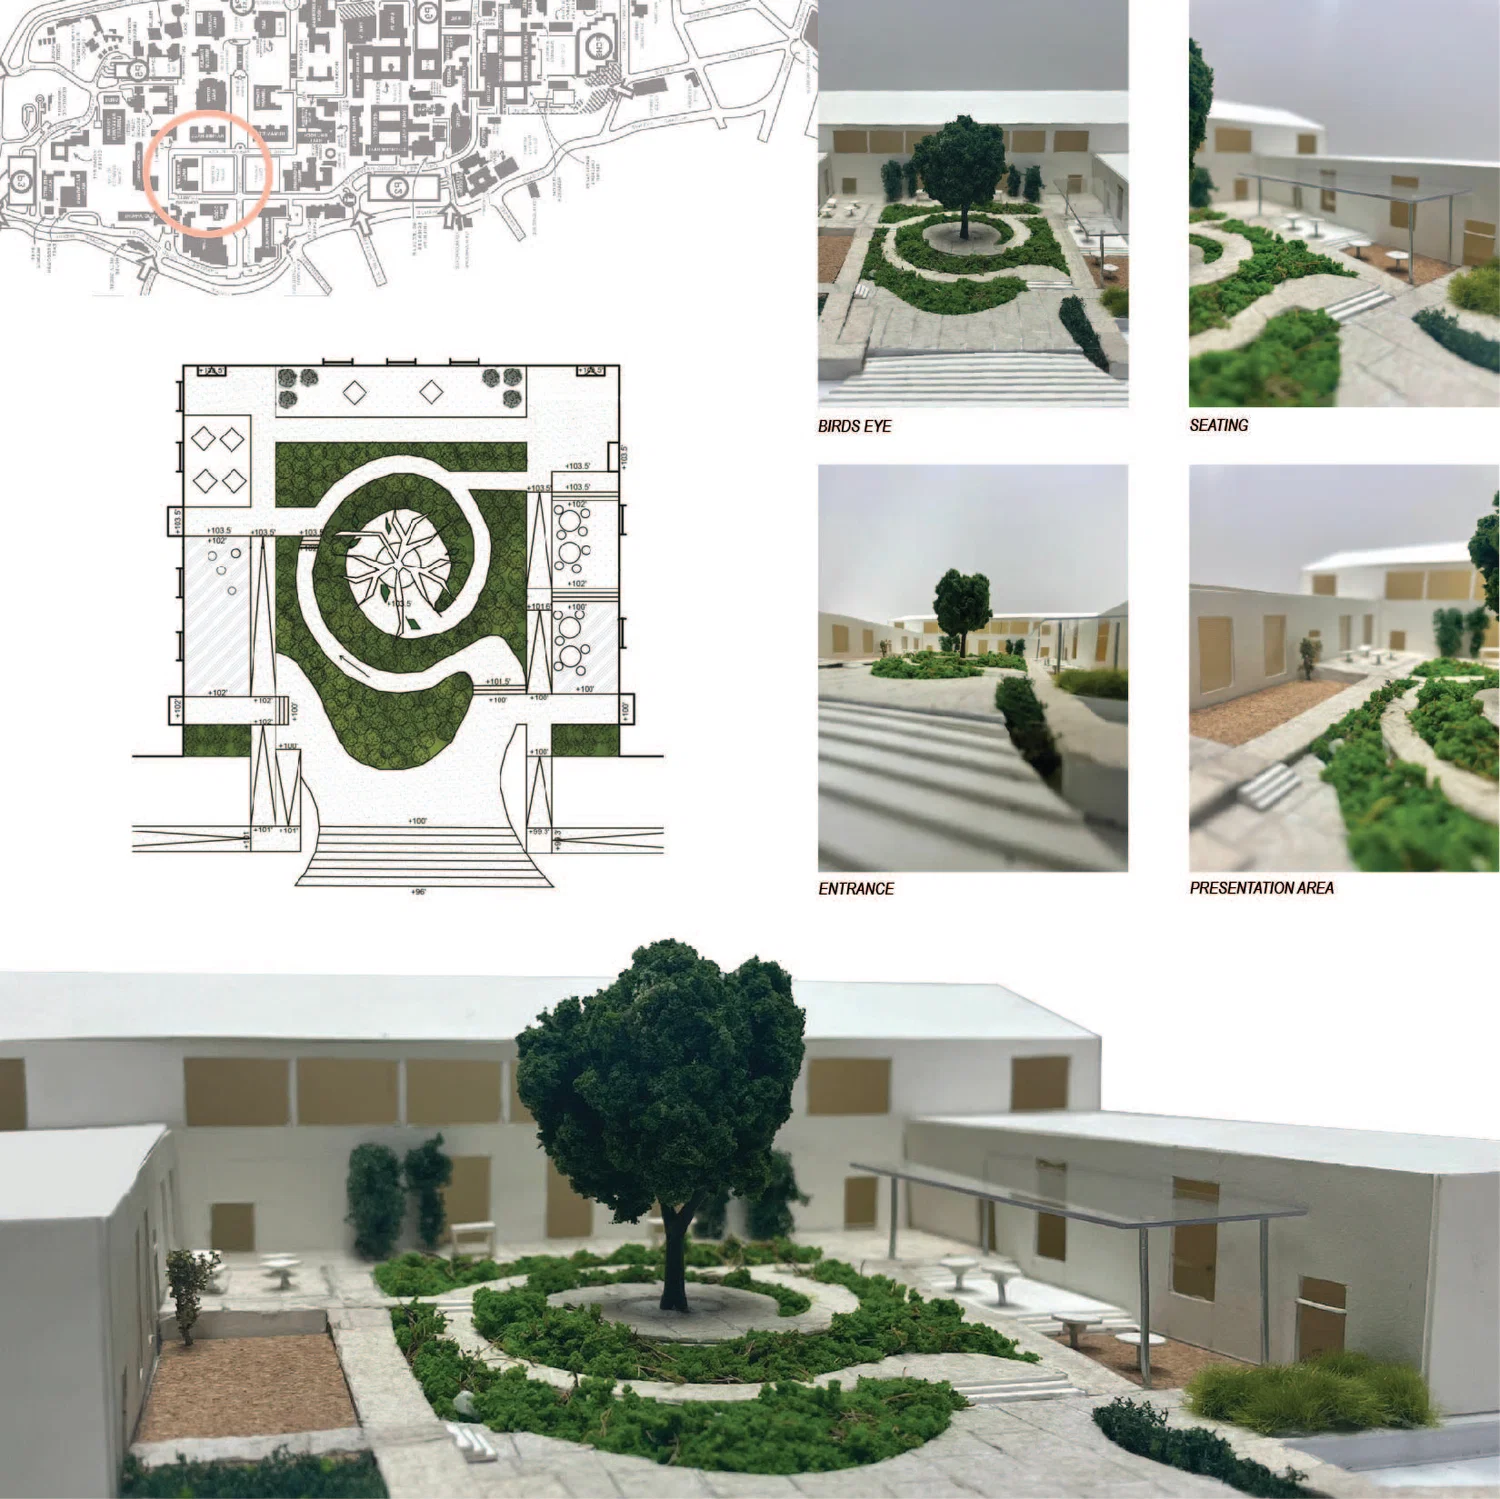 In order to enliven the existing perloff courtyard, and make a more picturesque and functional public space, the design for given courtyard portrays curved ramps around the center of the site which are ADA access accessible. With a grand entrance with long open stairs, you are invited to a calming spiral that leads to a central seating/reading area. As per the requirements, there is an outdoor eating area and a place for exhibitions/ show and tell. 